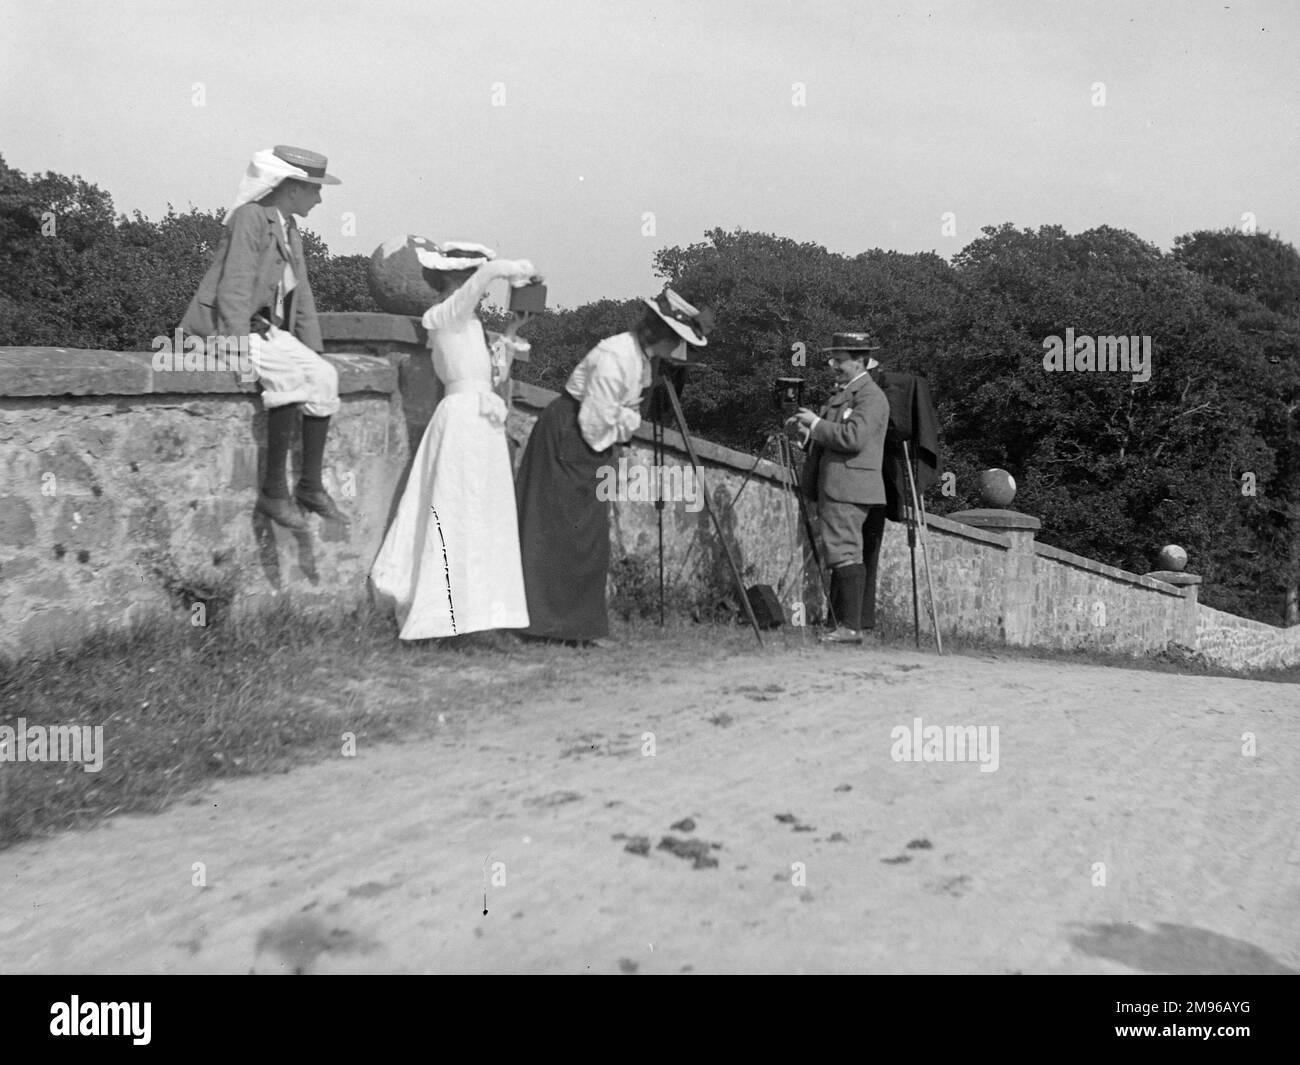 A photographic party on the bridge at Slebech, Pembrokeshire, West Wales.  Blackpool Bridge, crossing the River Cleddau, is a Grade II listed, single span bridge, built about 1825 for the de Rutzen family who owned Slebech Park at that time. Stock Photo